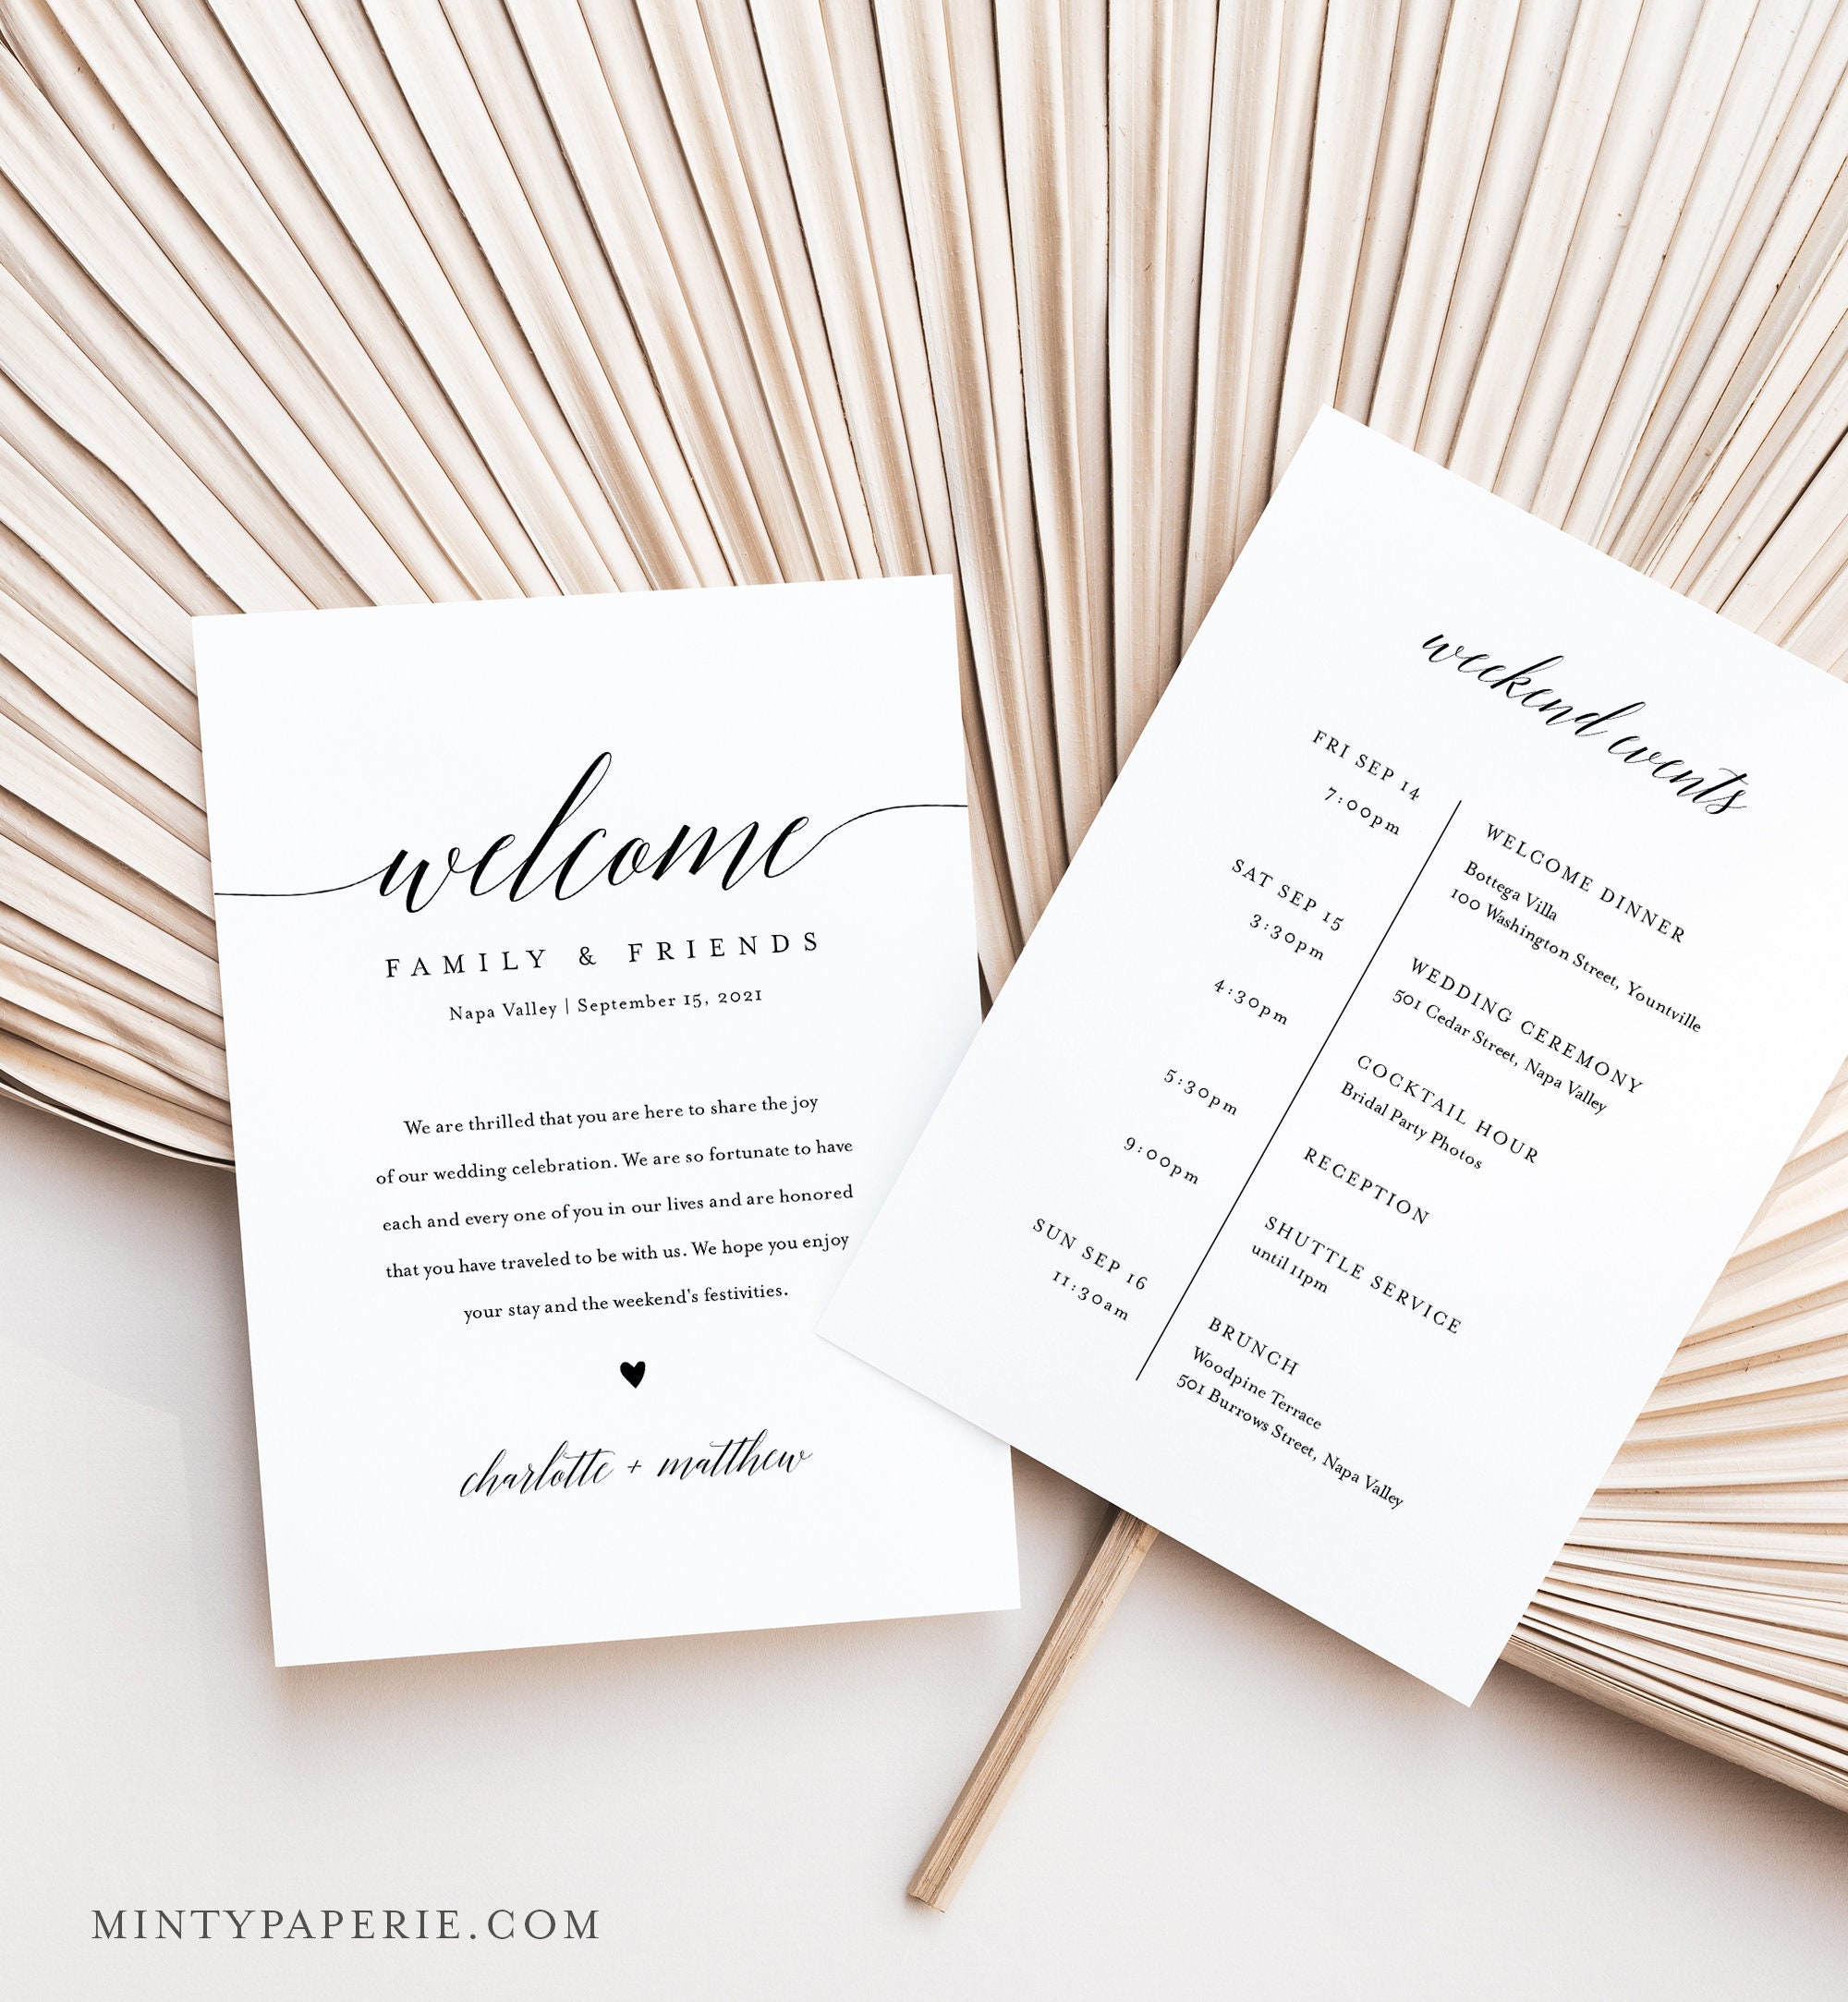 Welcome Letter and Itinerary, Wedding Schedule of Events, Agenda, Printable Welcome  Bag Note, 100% Editable, Instant Download #034-107WB